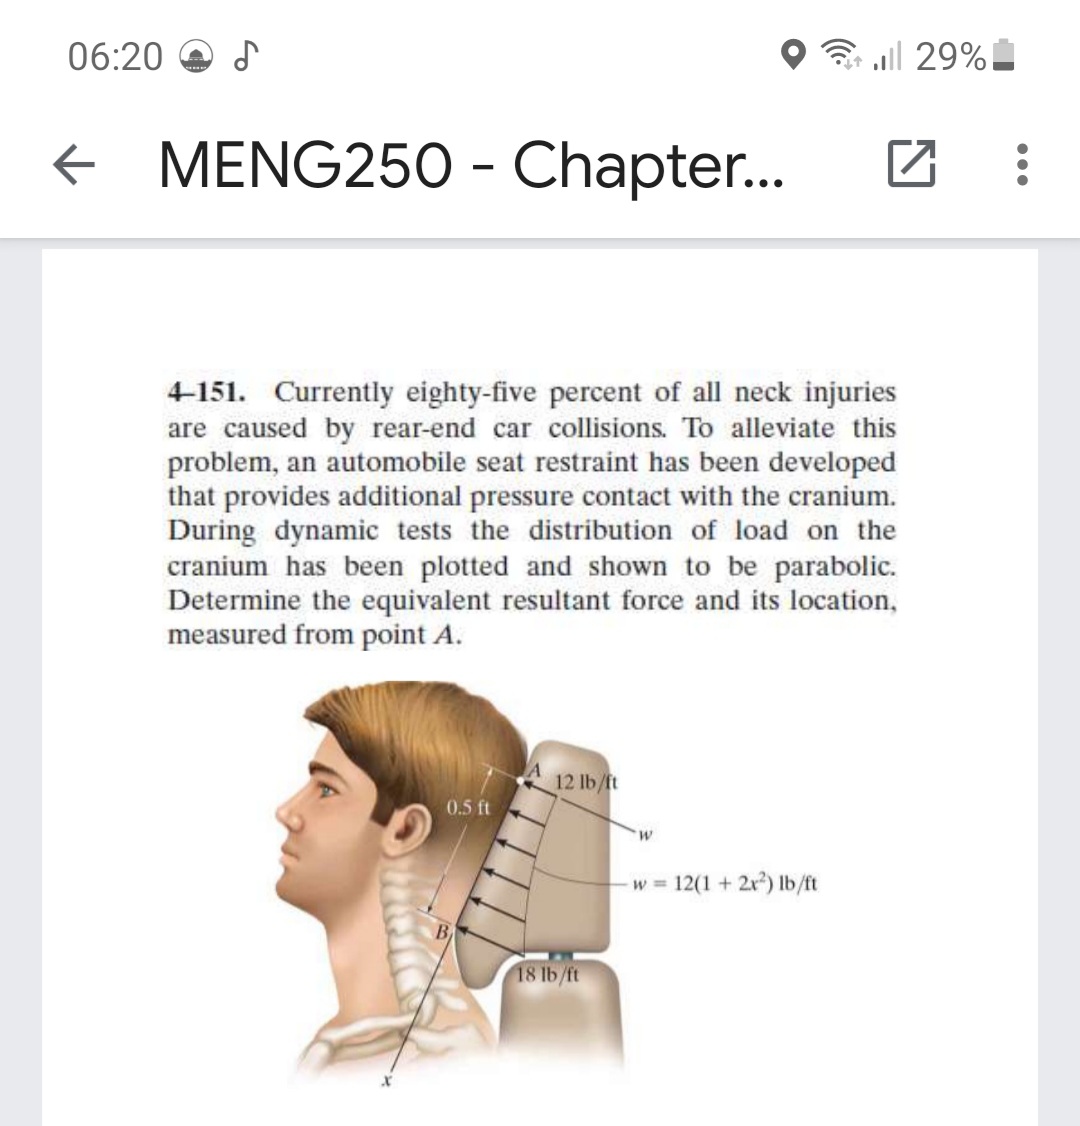 06:20
all 29%
MENG250 - Chapter..
4-151. Currently eighty-five percent of all neck injuries
are caused by rear-end car collisions. To alleviate this
problem, an automobile seat restraint has been developed
that provides additional pressure contact with the cranium.
During dynamic tests the distribution of load on the
cranium has been plotted and shown to be parabolic.
Determine the equivalent resultant force and its location,
measured from point A.
12 lb/ft
0.5 ft
W.
w = 12(1 + 2x) lb/ft
18 lb/ft
